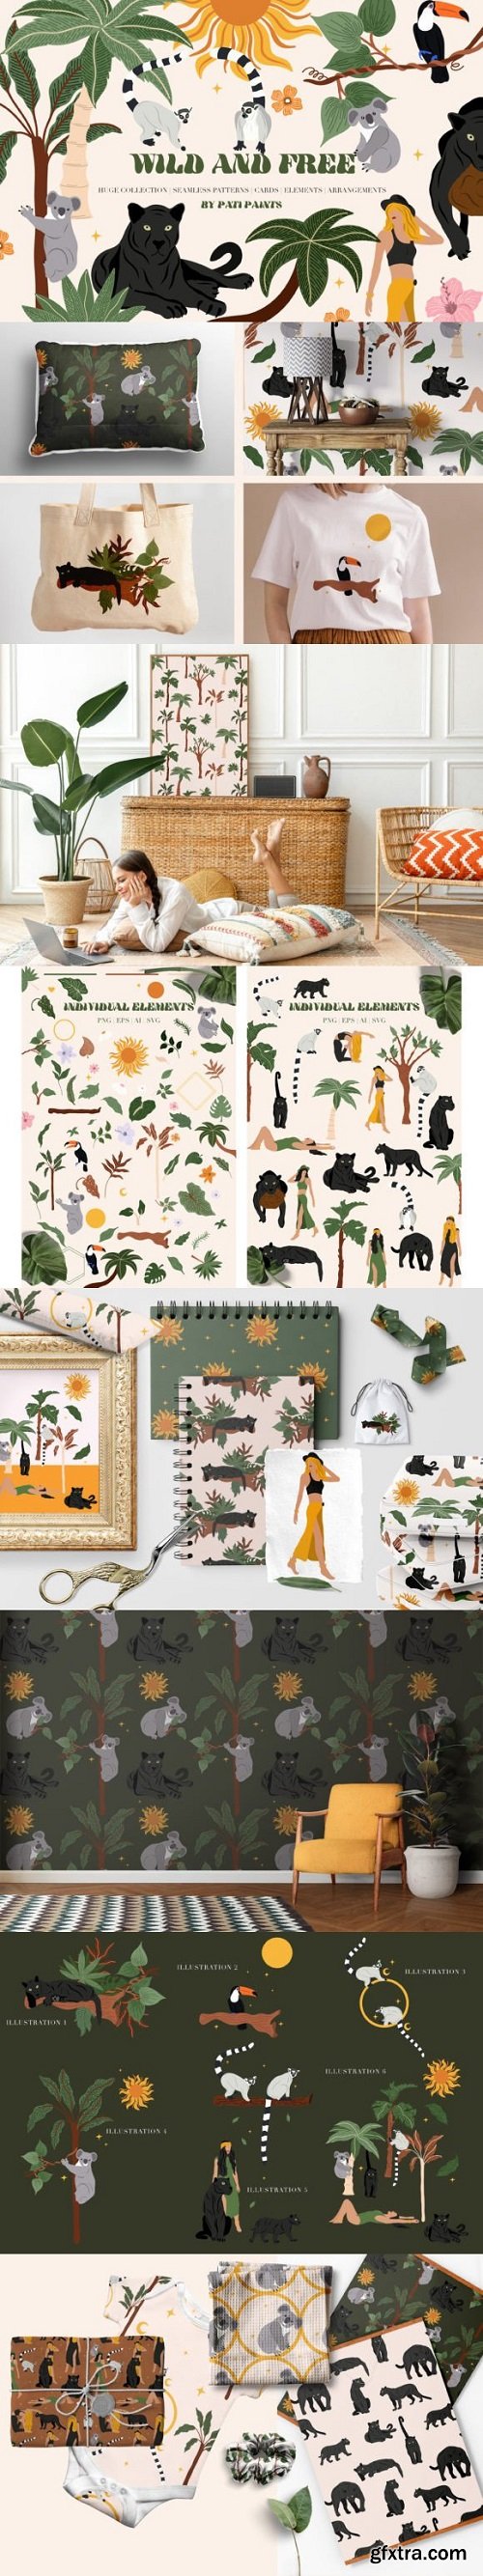 Wild and Free Jungle Vector Collection